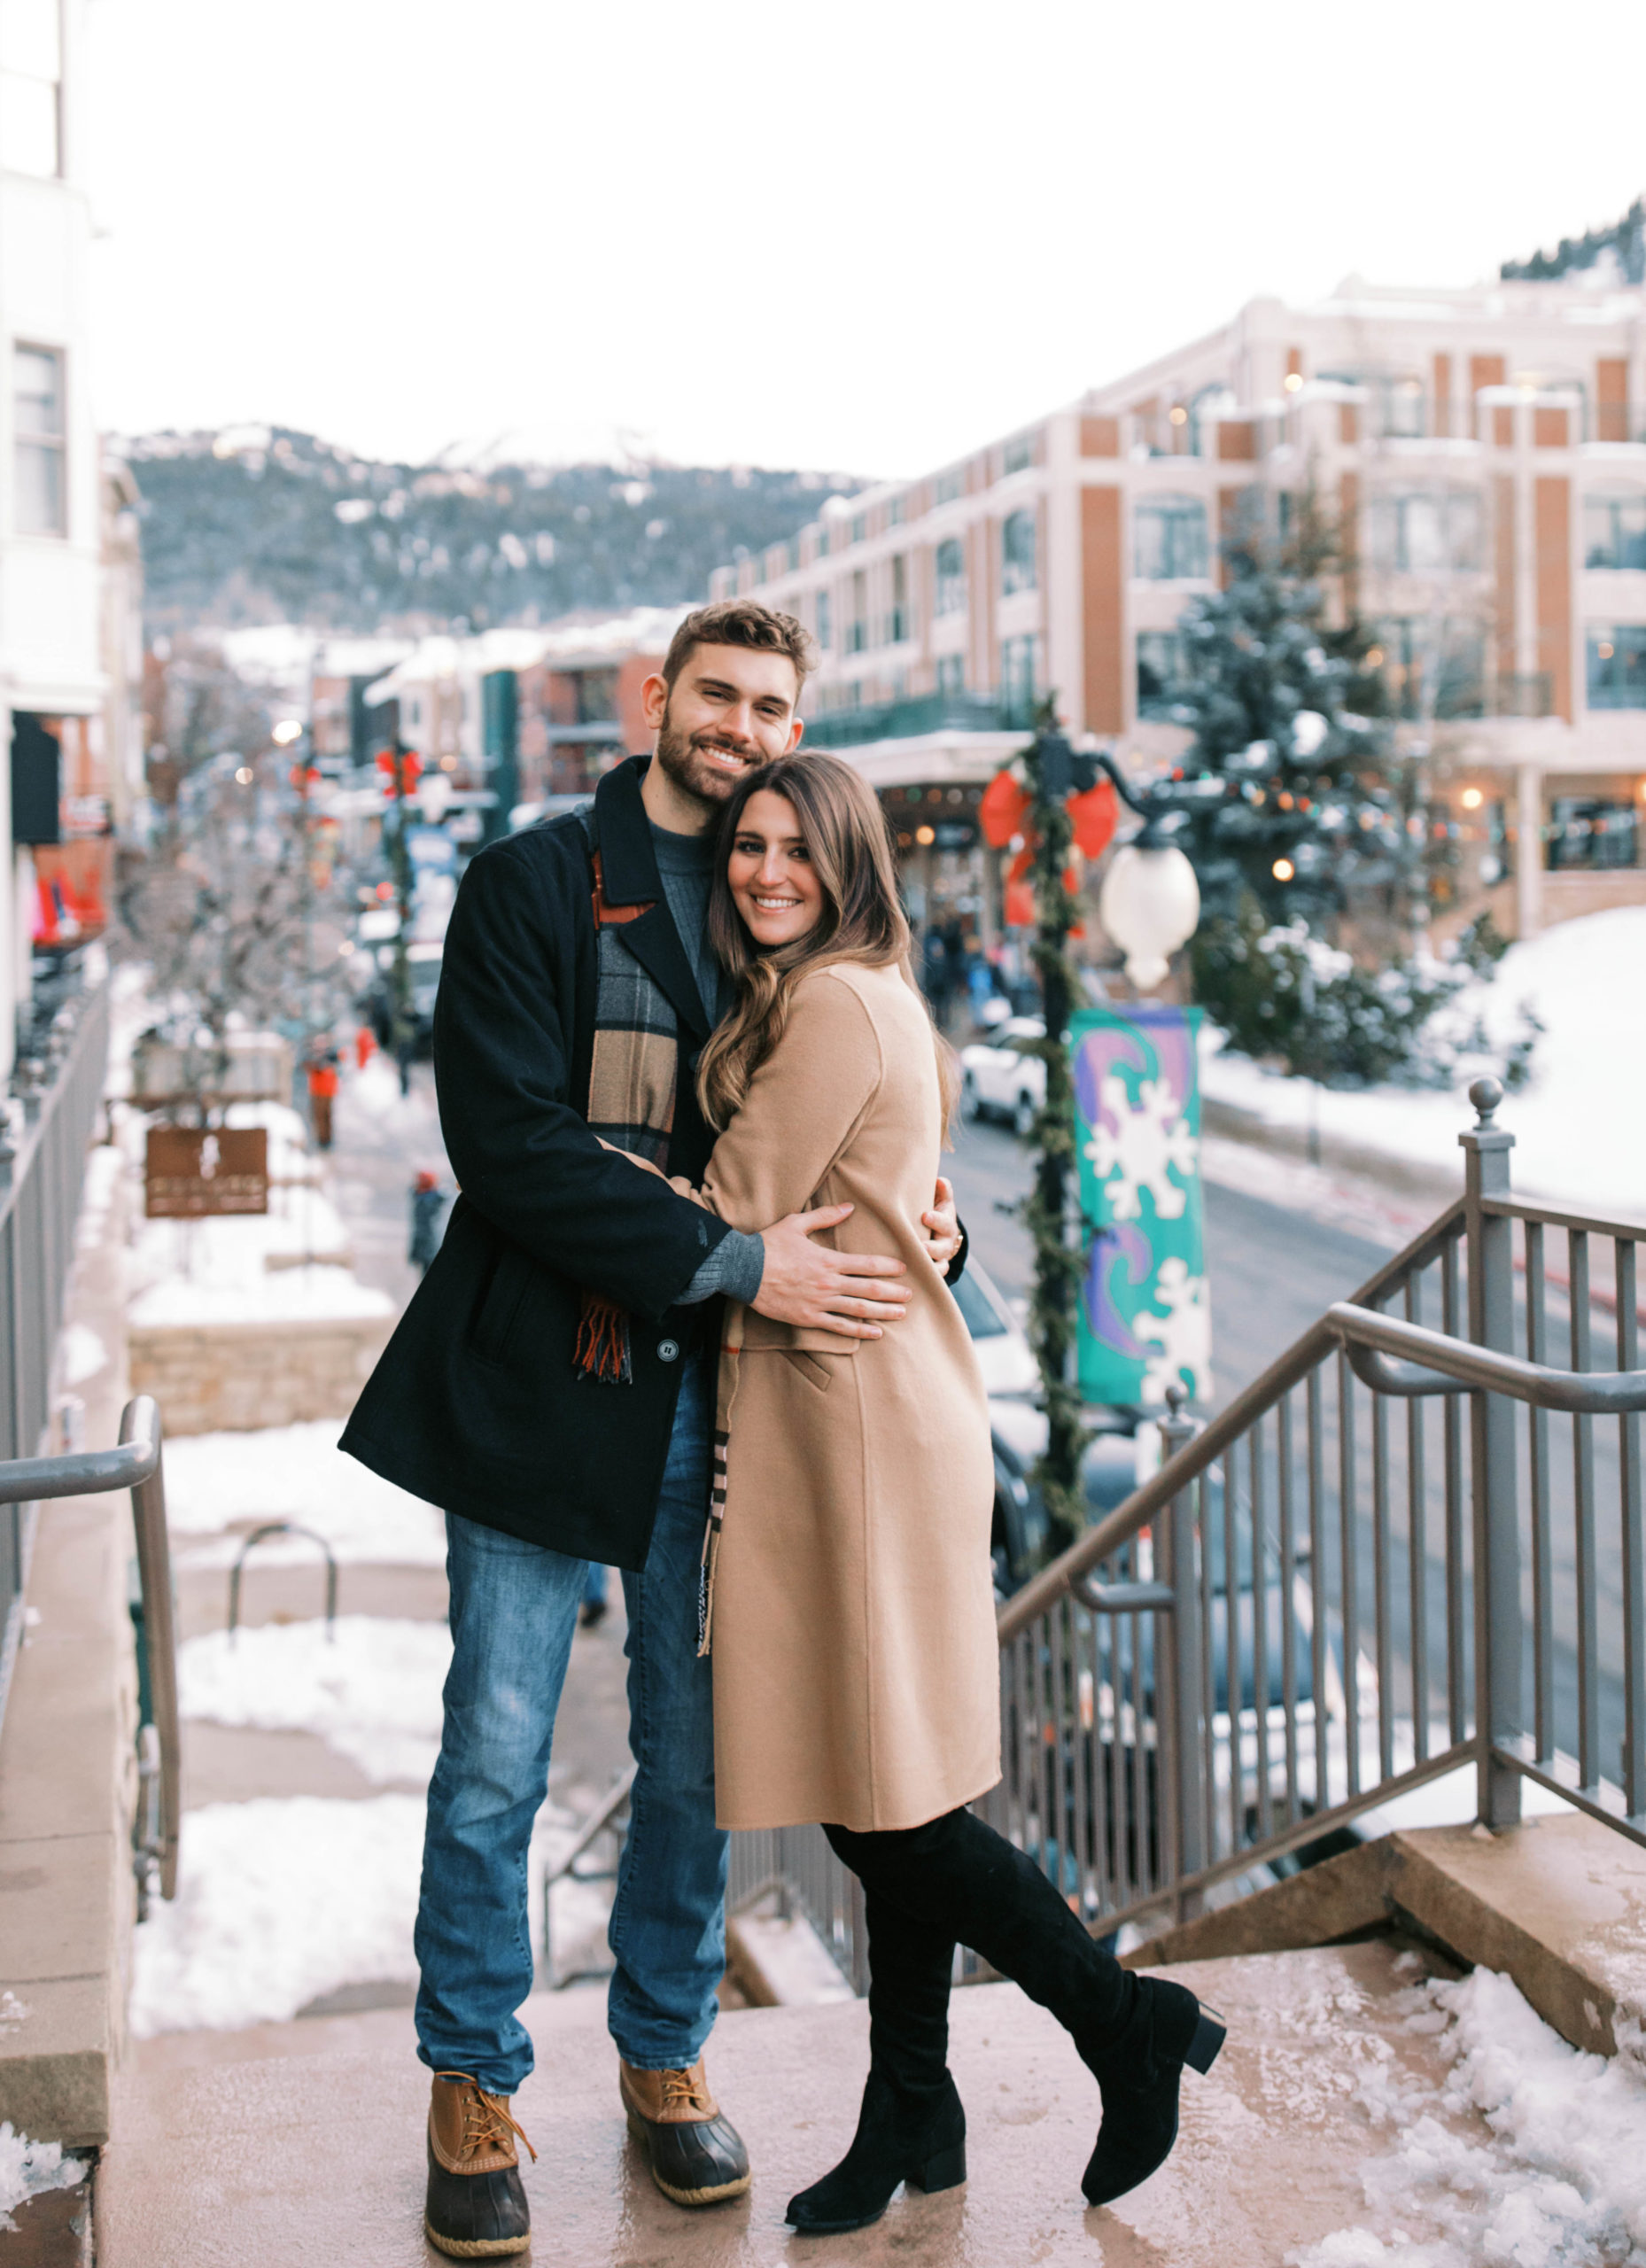 a couple poses in downtown Park City Utah for Christmas engagement photos. photo taken by Megan Robinson Photography